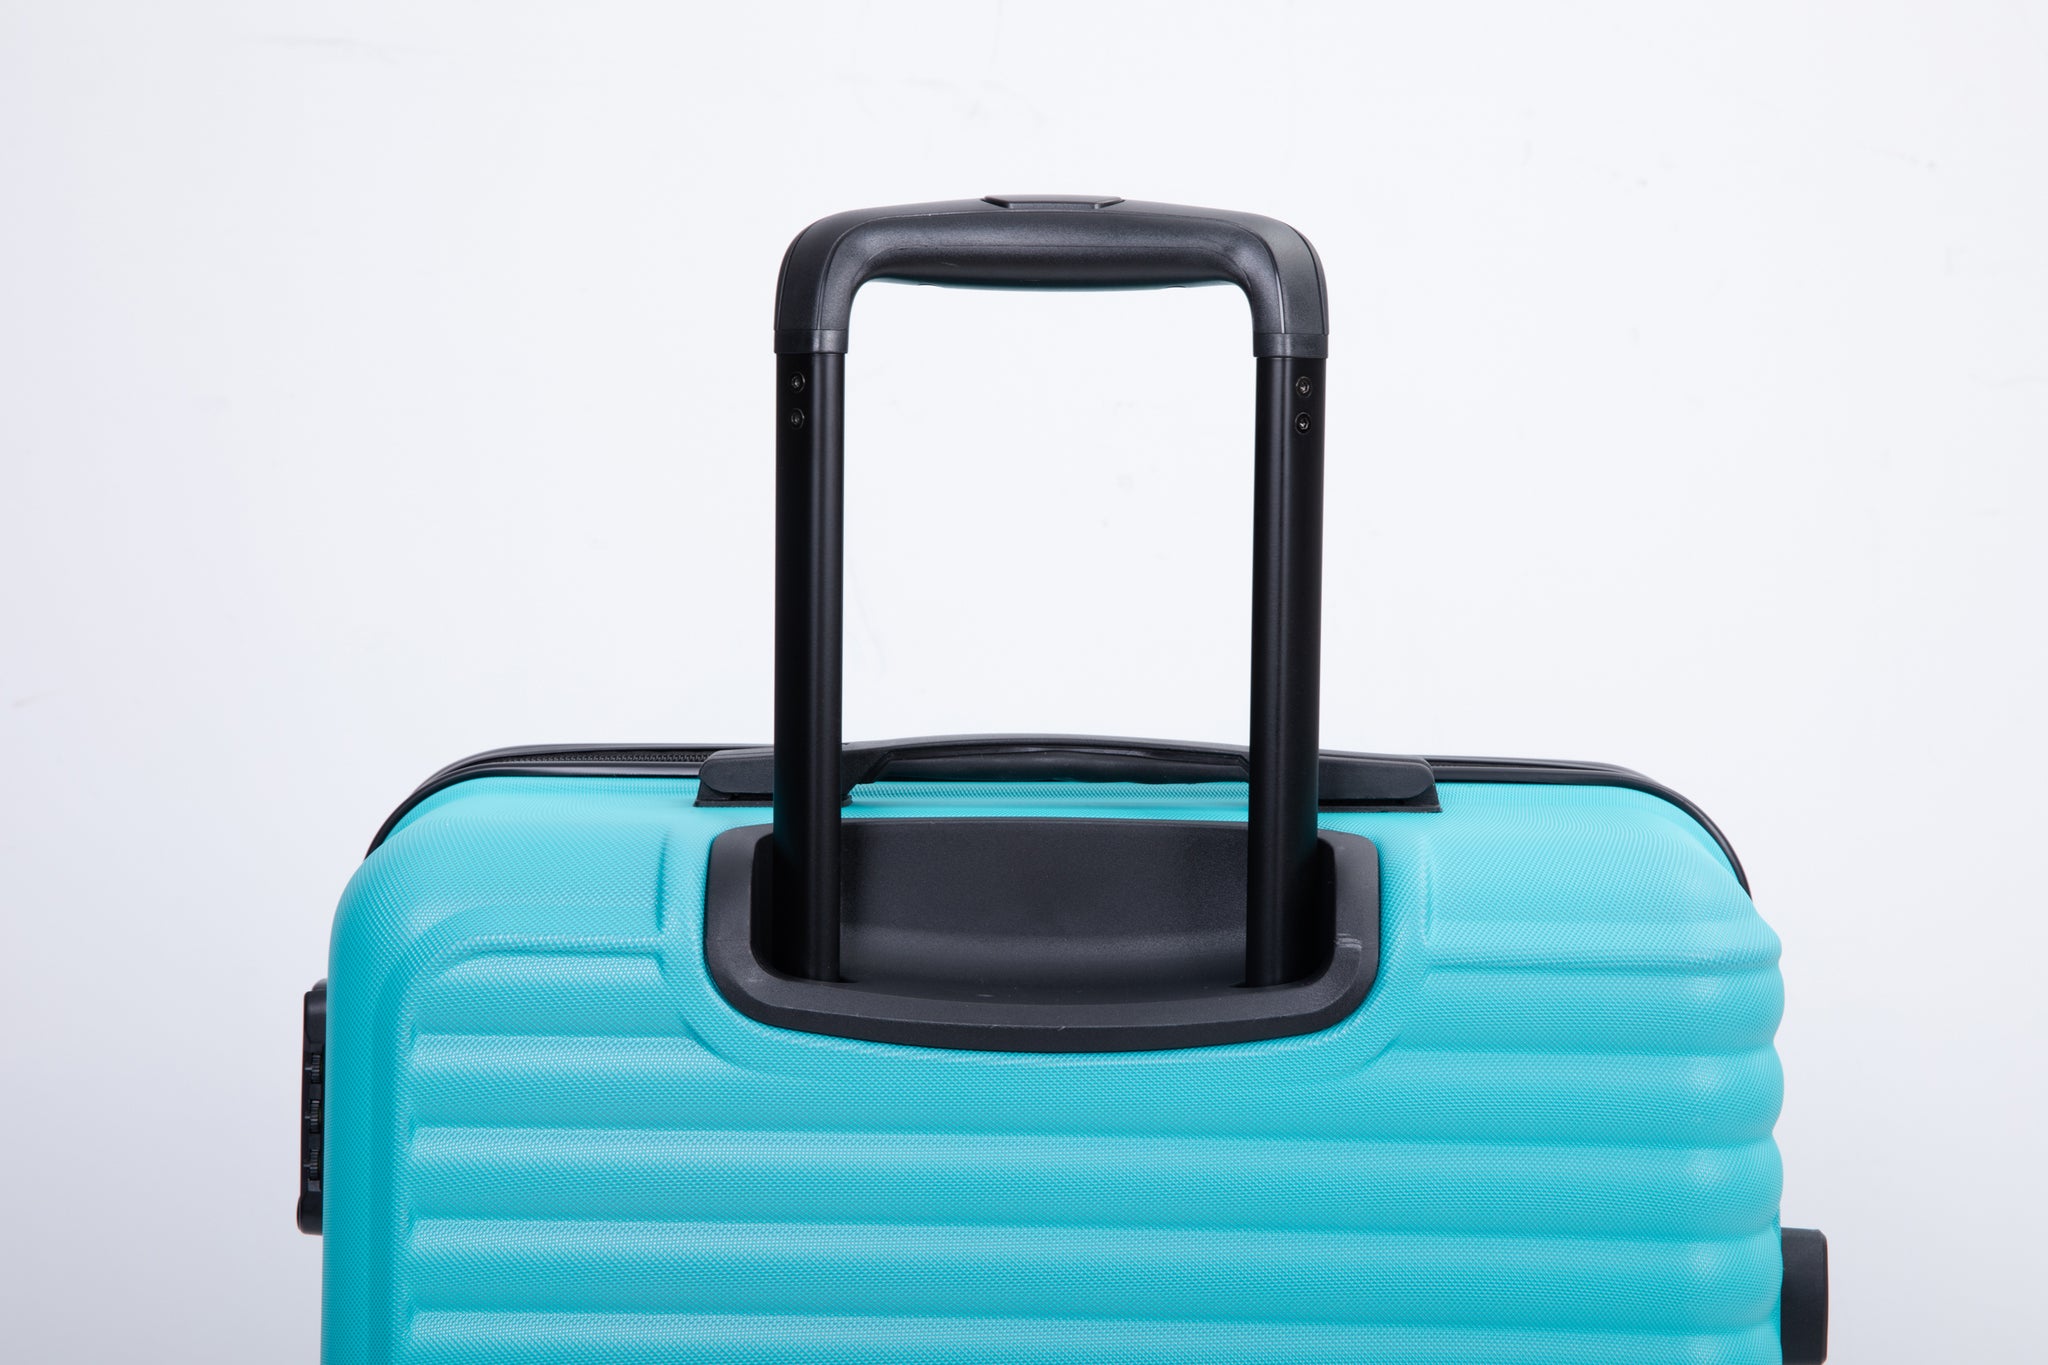 3 Piece Luggage Sets ABS Lightweight Suitcase with Two turquoise-abs